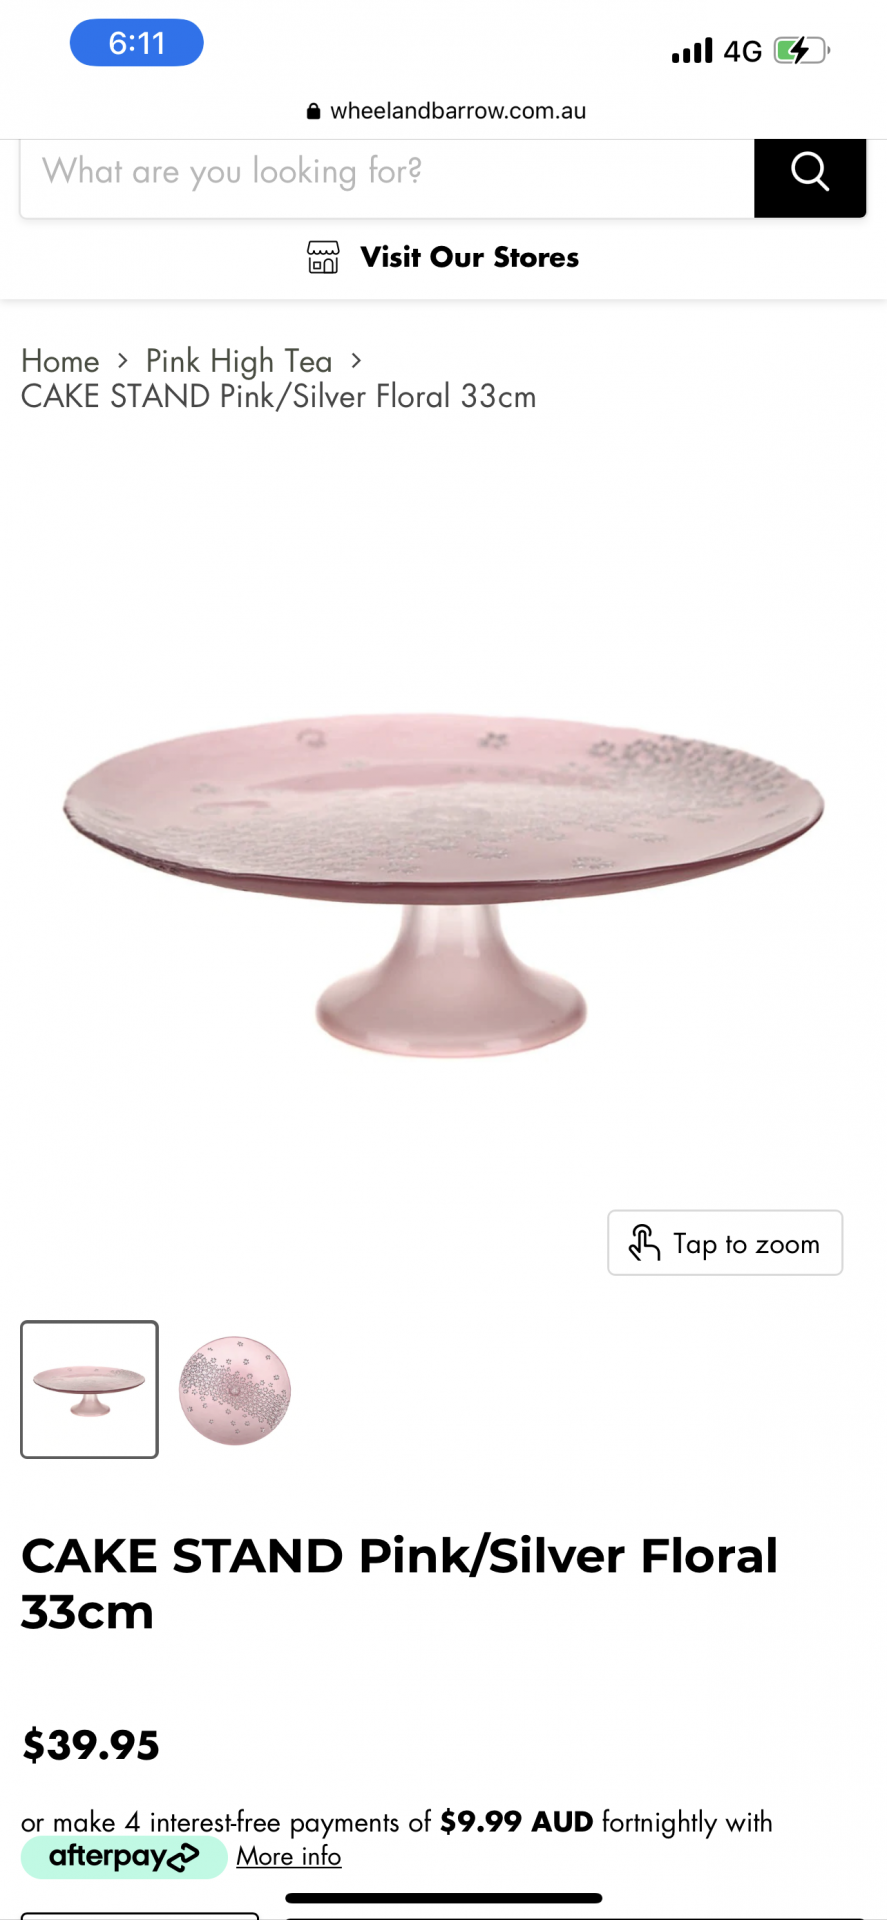 CAKE STAND Pink/Silver Floral 33cm